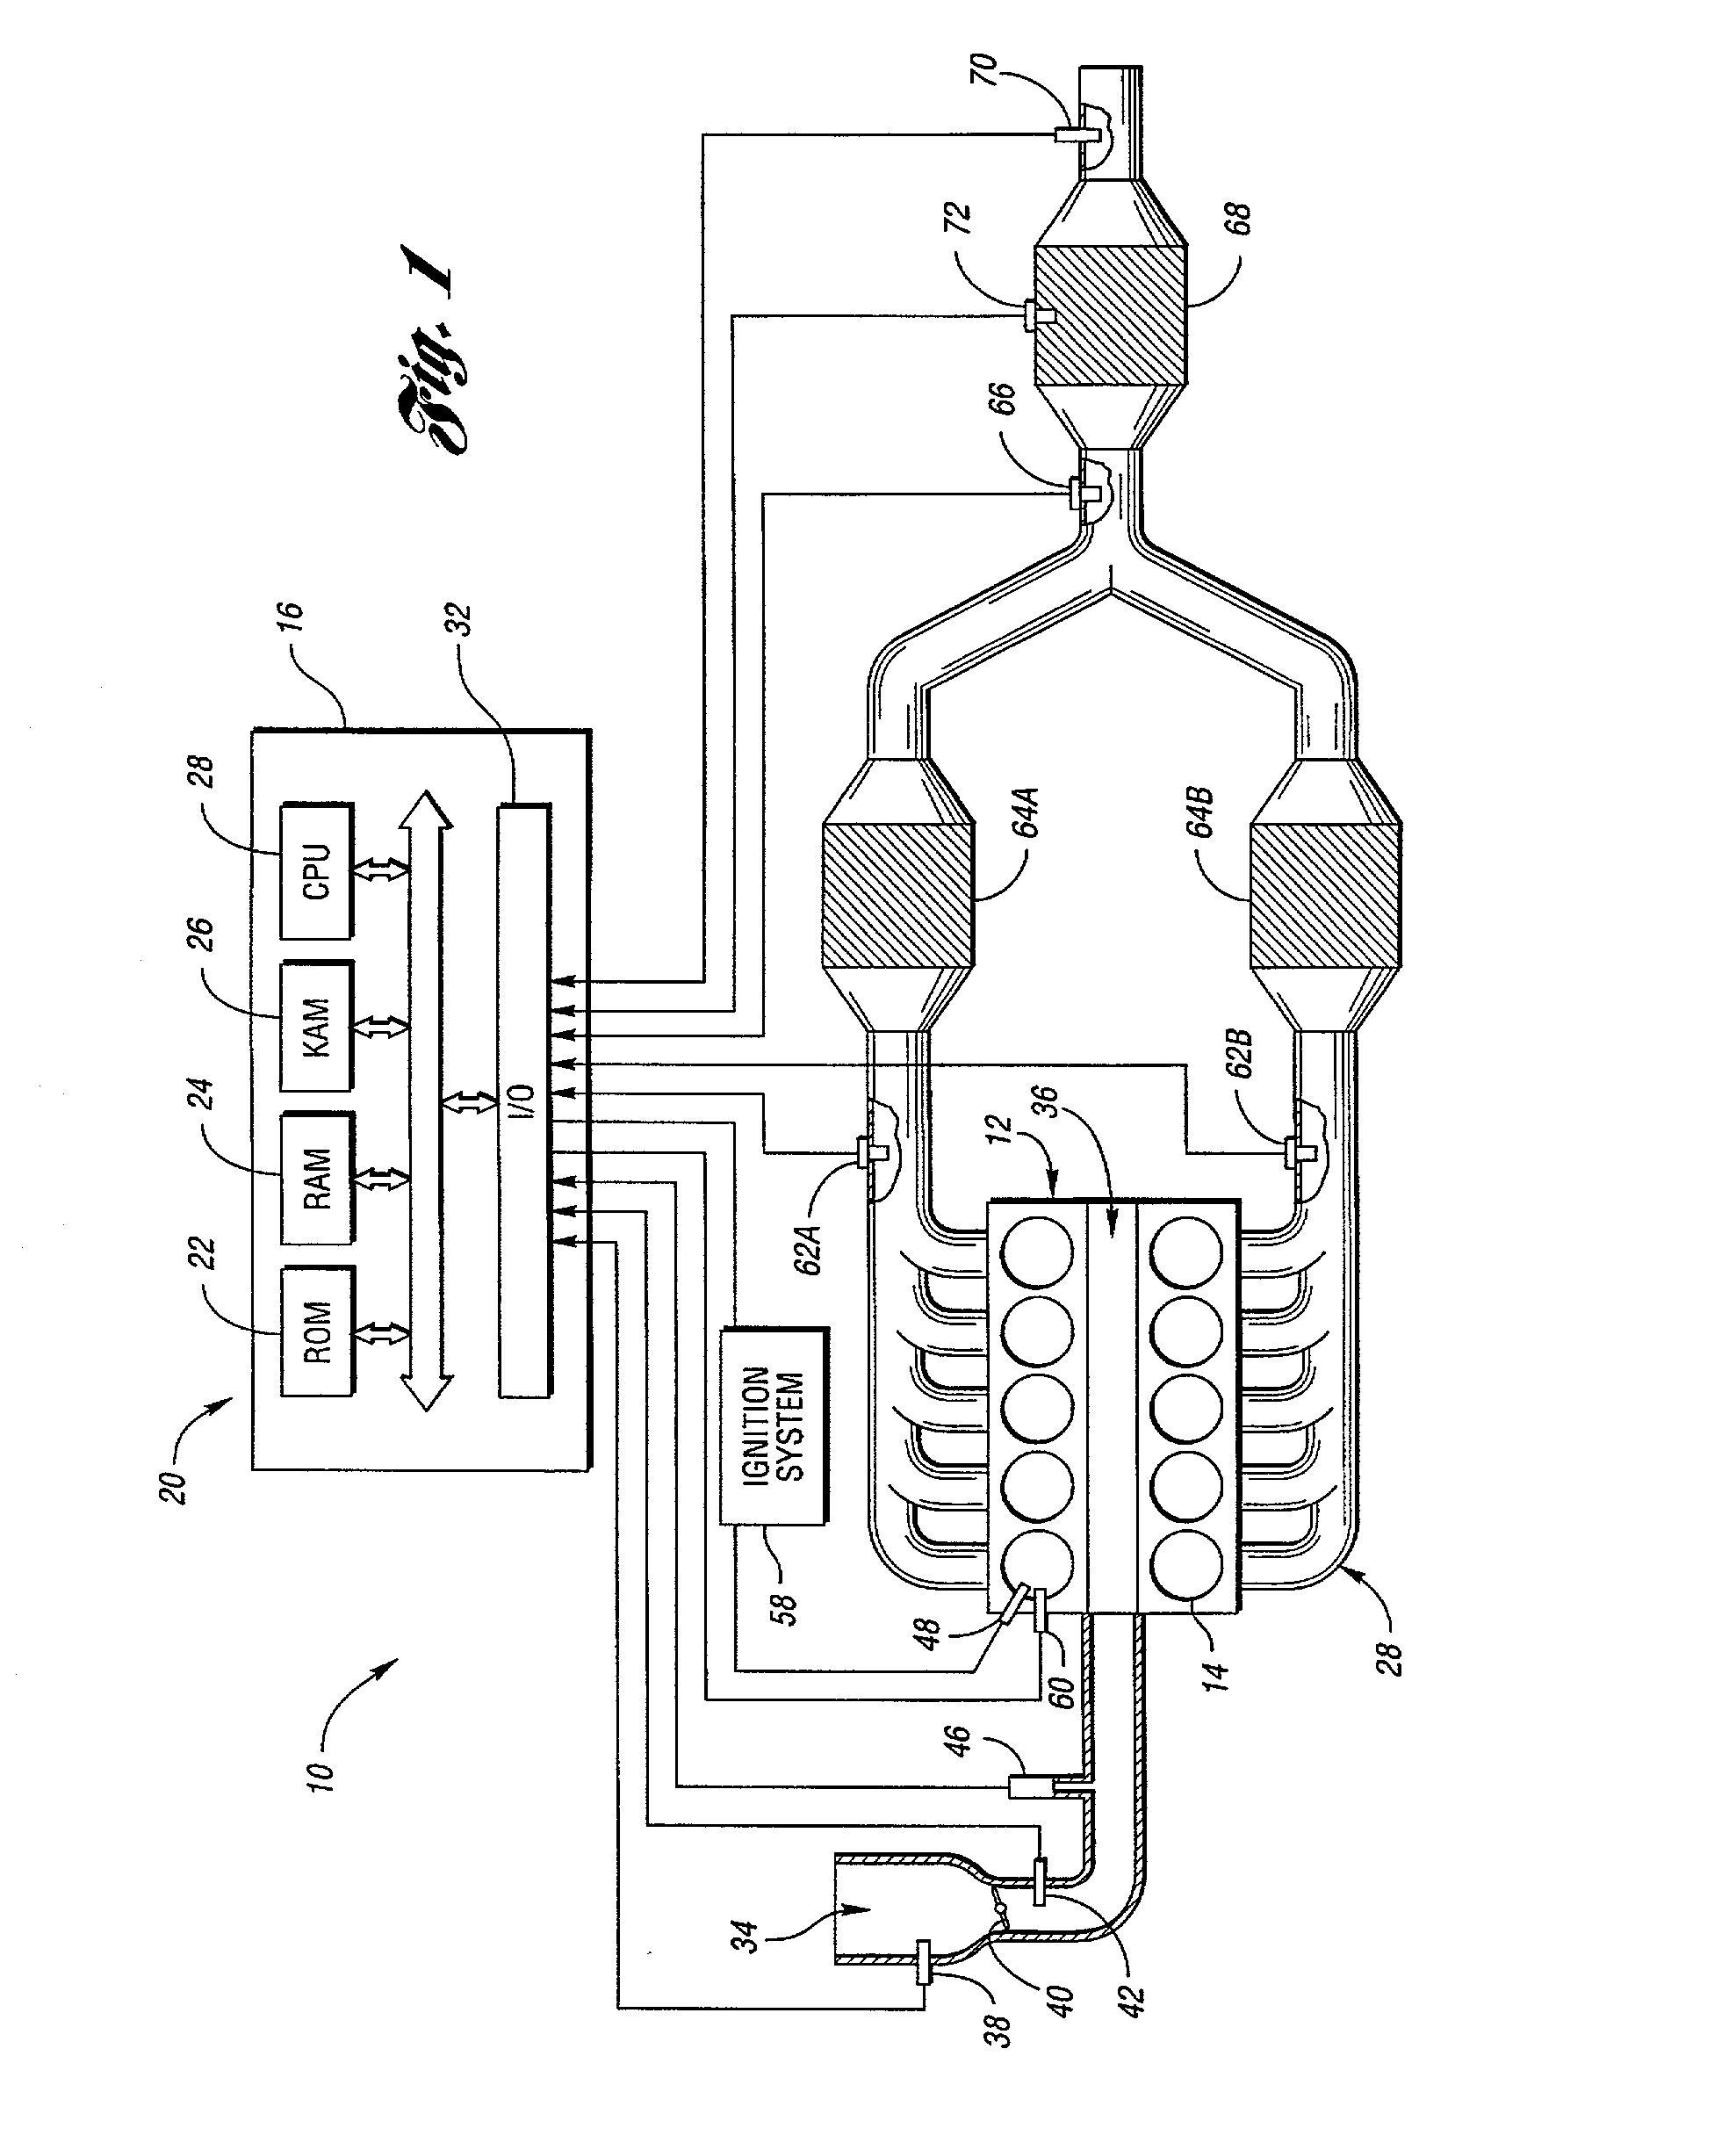 Variable displacement engine starting control